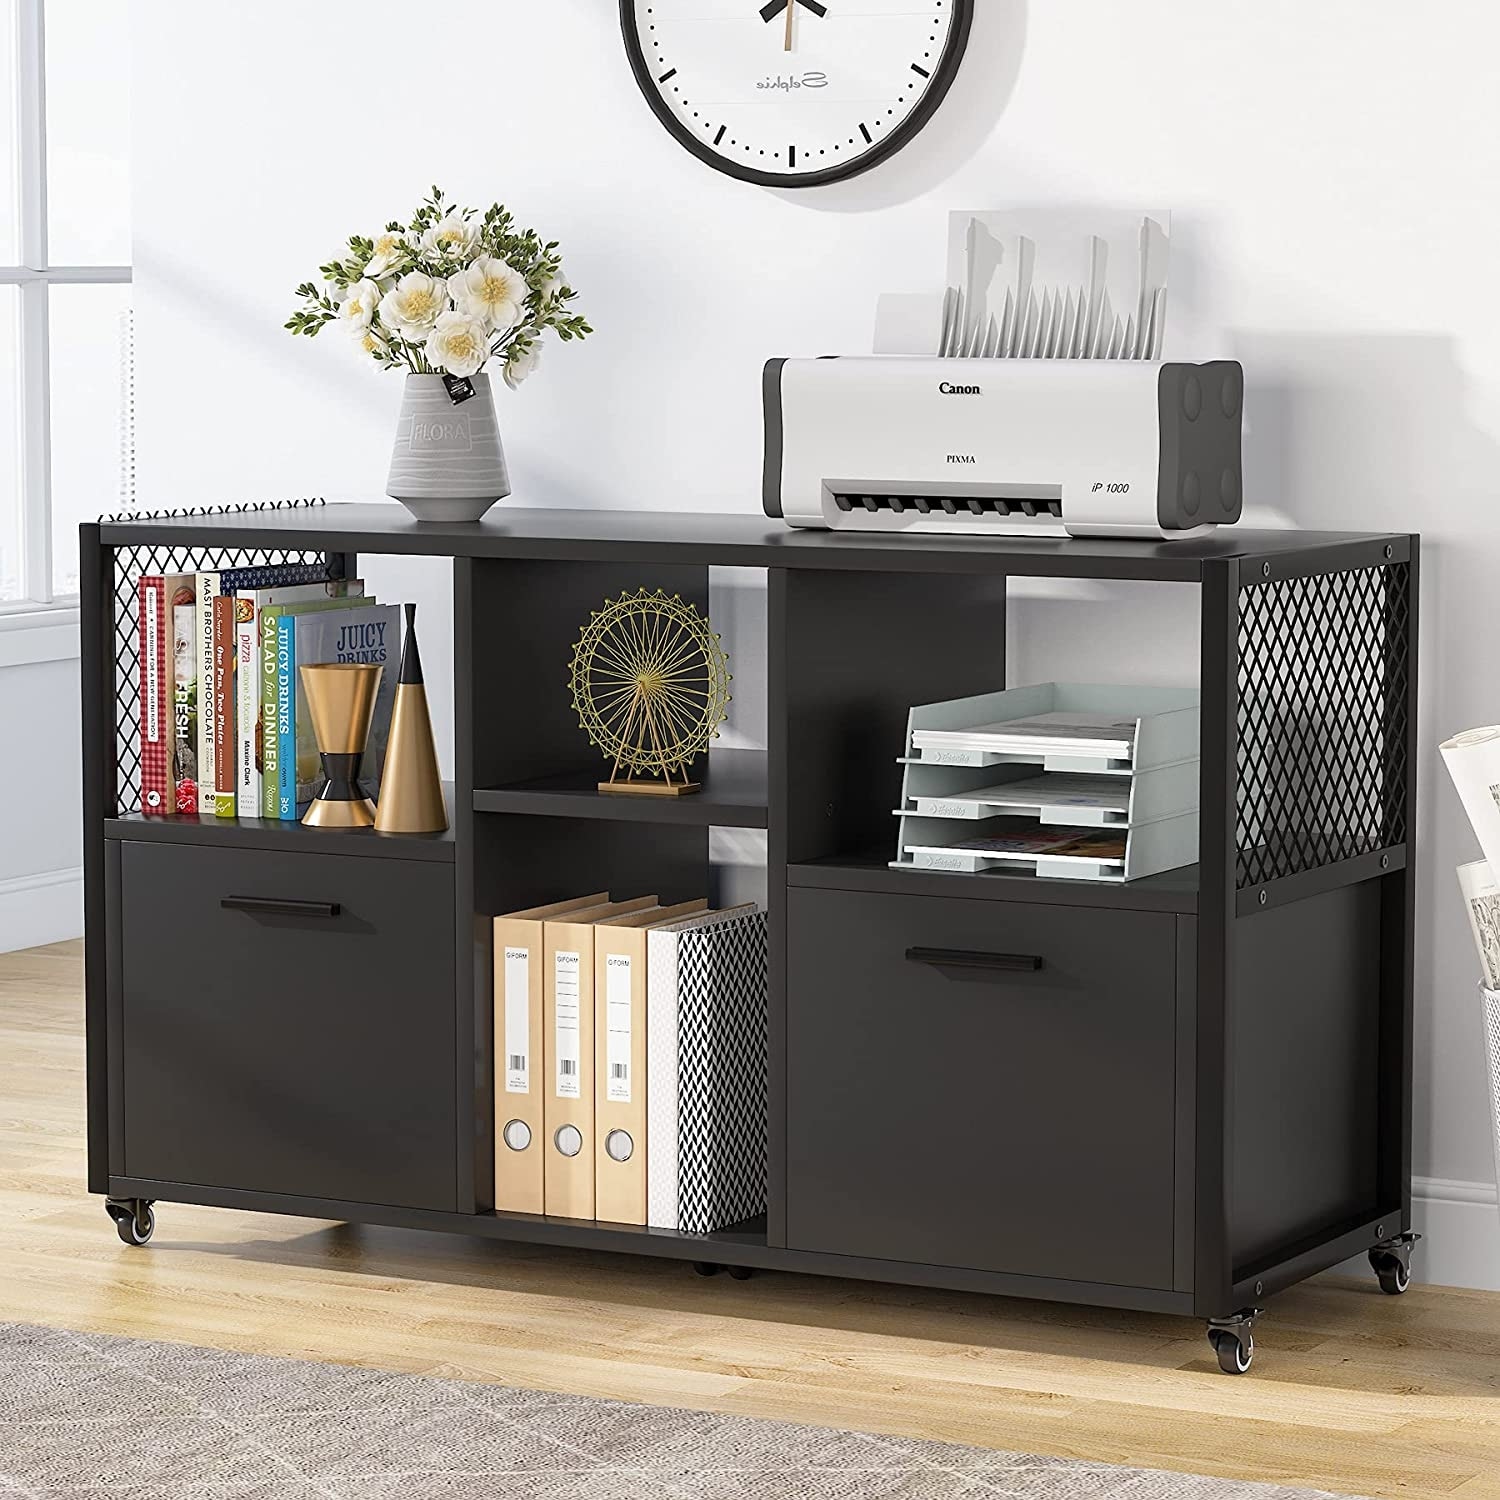 https://ak1.ostkcdn.com/images/products/is/images/direct/5db435ebc757138b140112bd50d0d7ca00c6fc14/Large-Lateral-File-Cabinets-Mobile-Filing-Cabinet-for-Home-Office.jpg